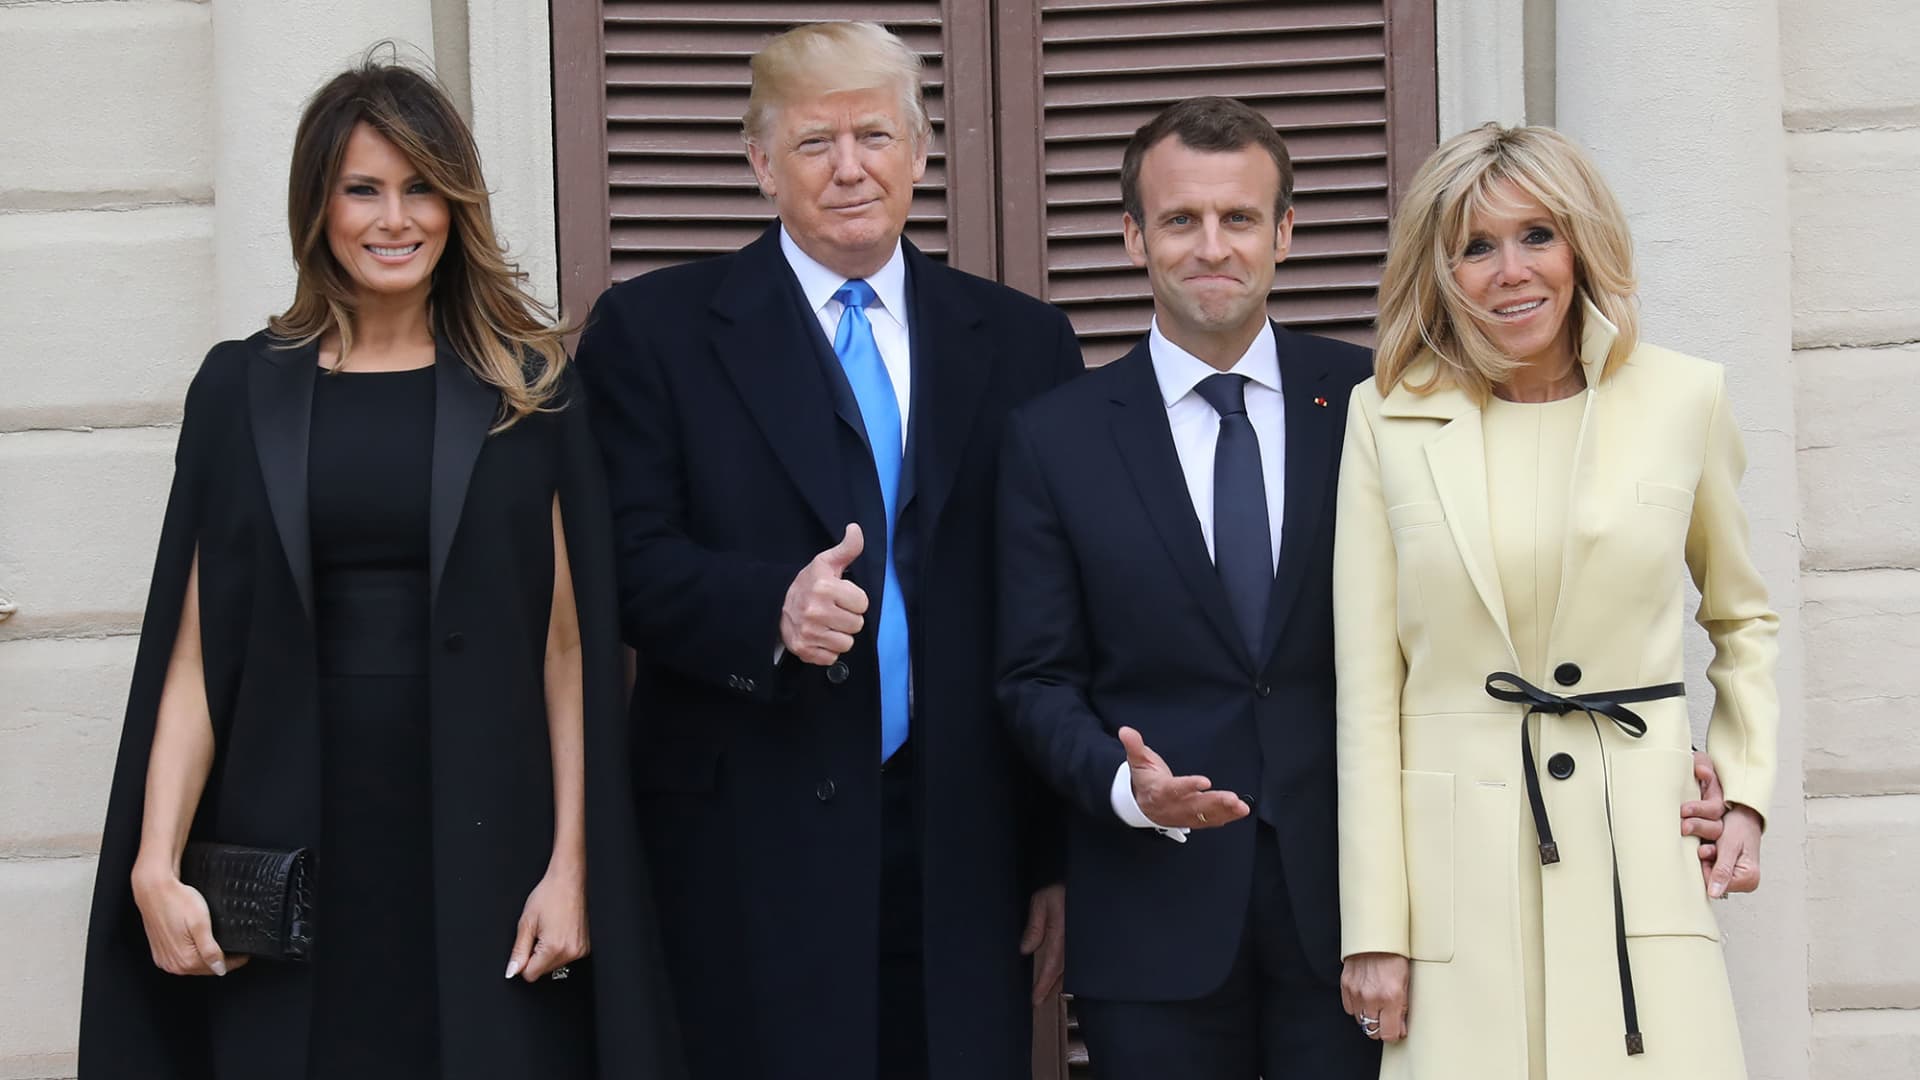 Here's a look at the Eiffel Tower restaurant Trump and Macron will